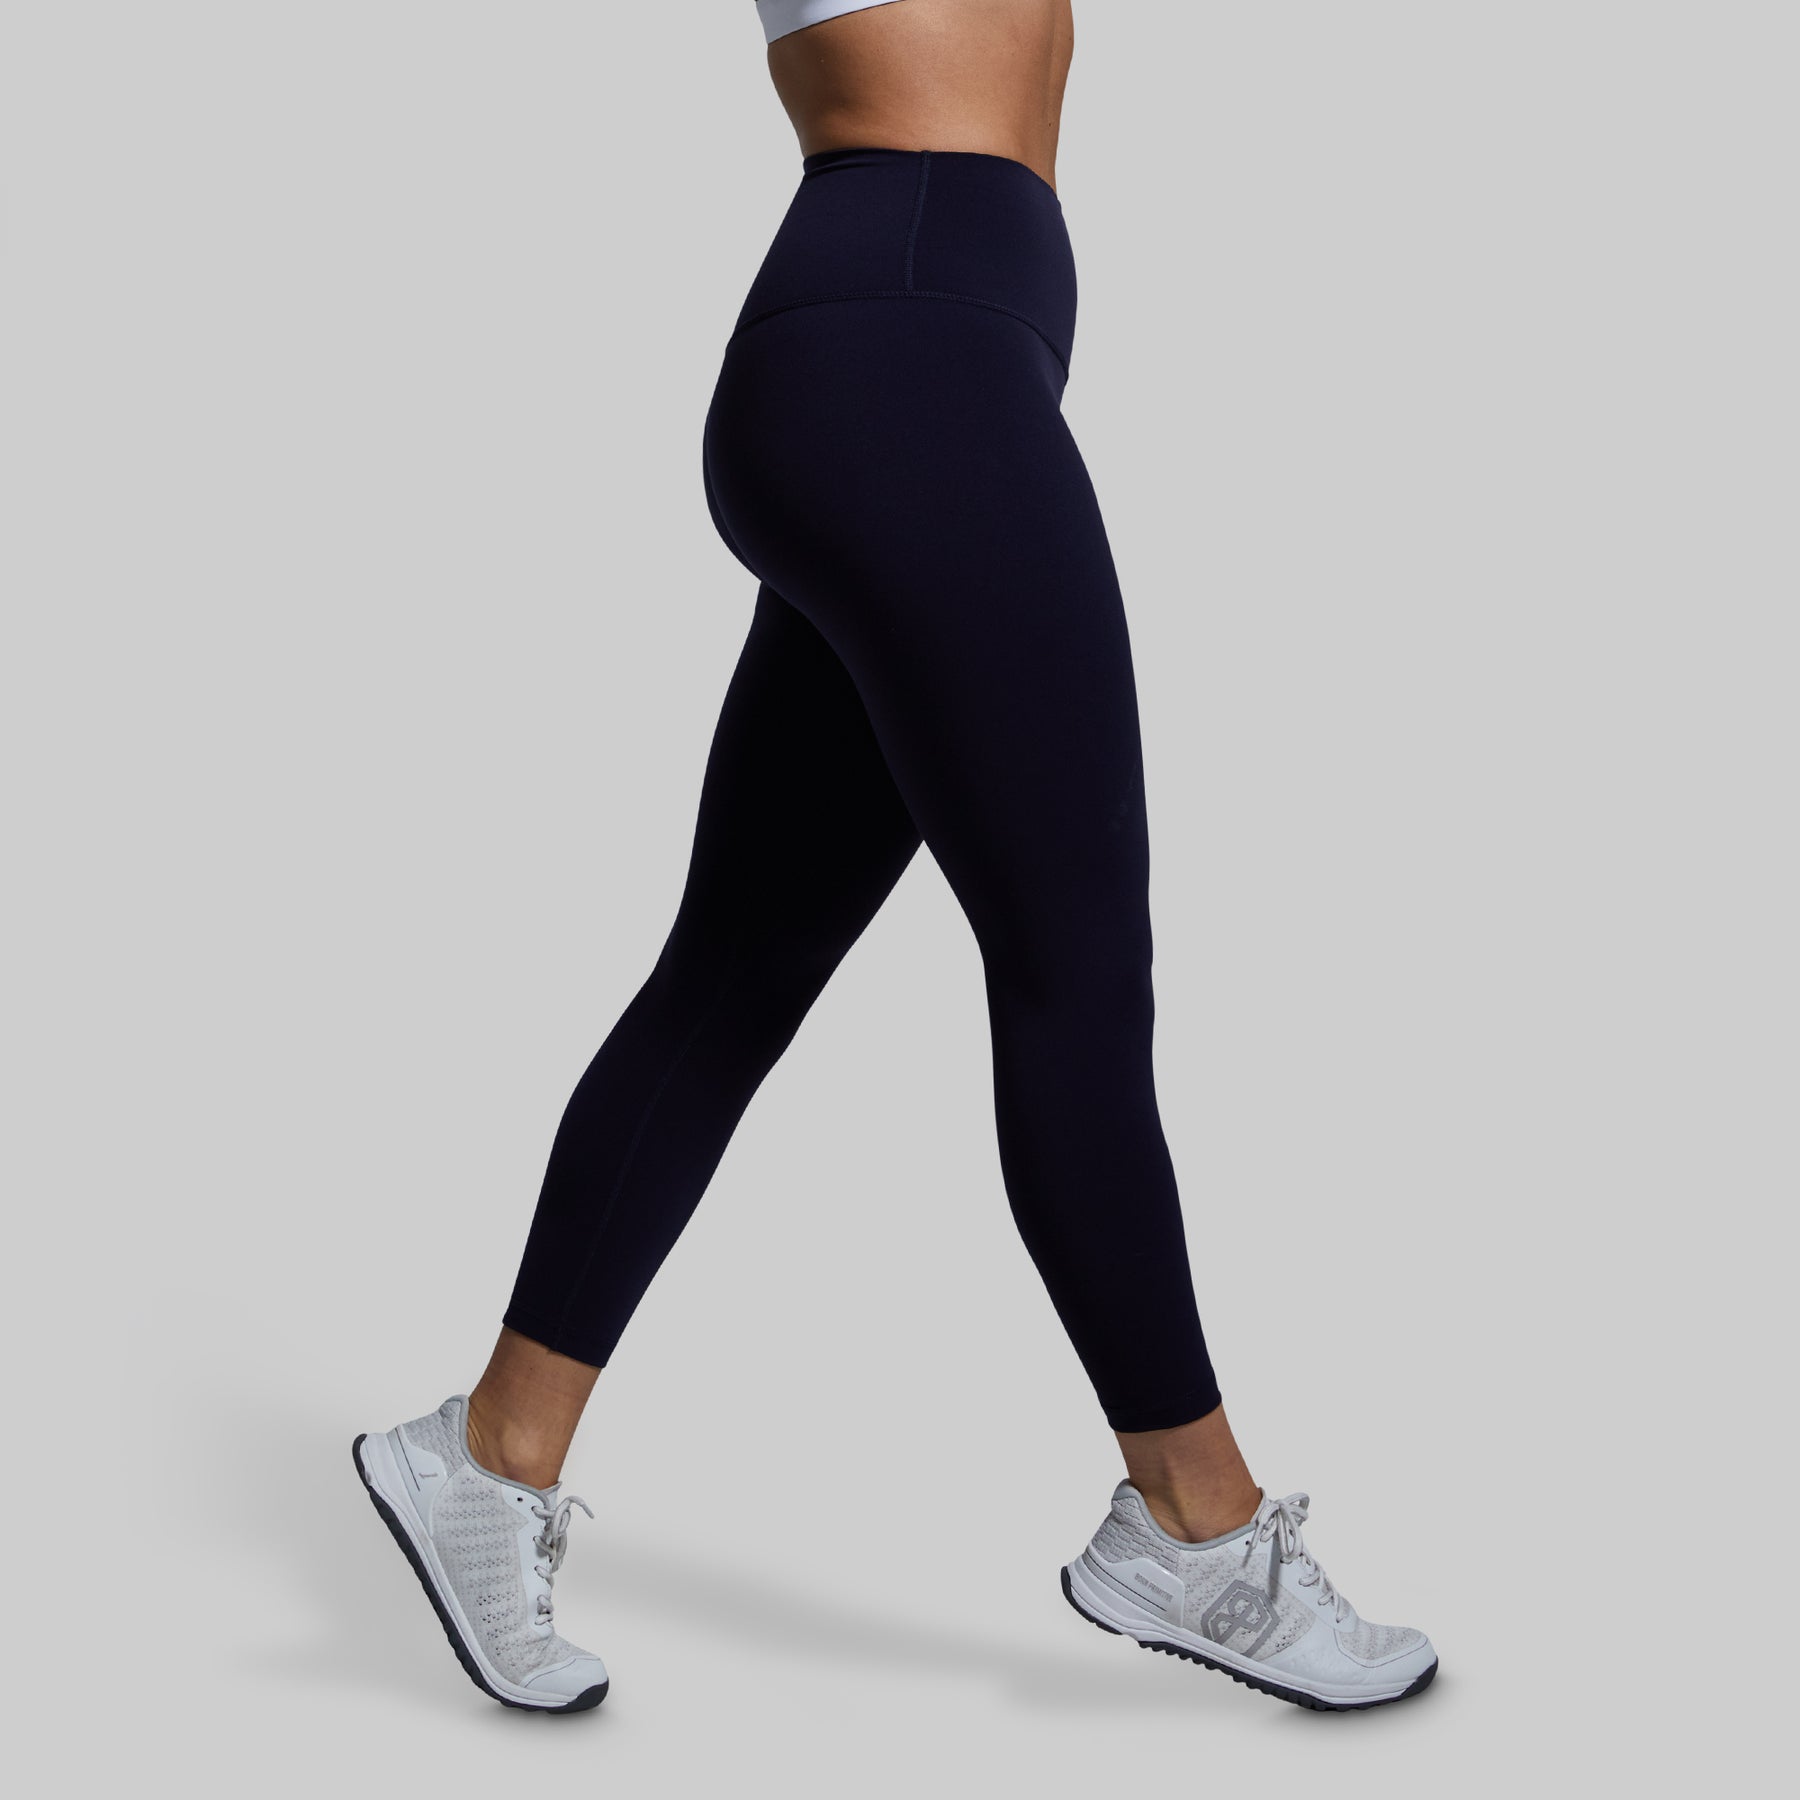  Born Primitive Paragon High-Waisted Workout Leggings for Women  (L, Navy Blue) - Form-Fitting Athletic Yoga Pants & Womens Gym Leggings  with Textured Patterned Design for Maximum Flexibility : Clothing, Shoes 